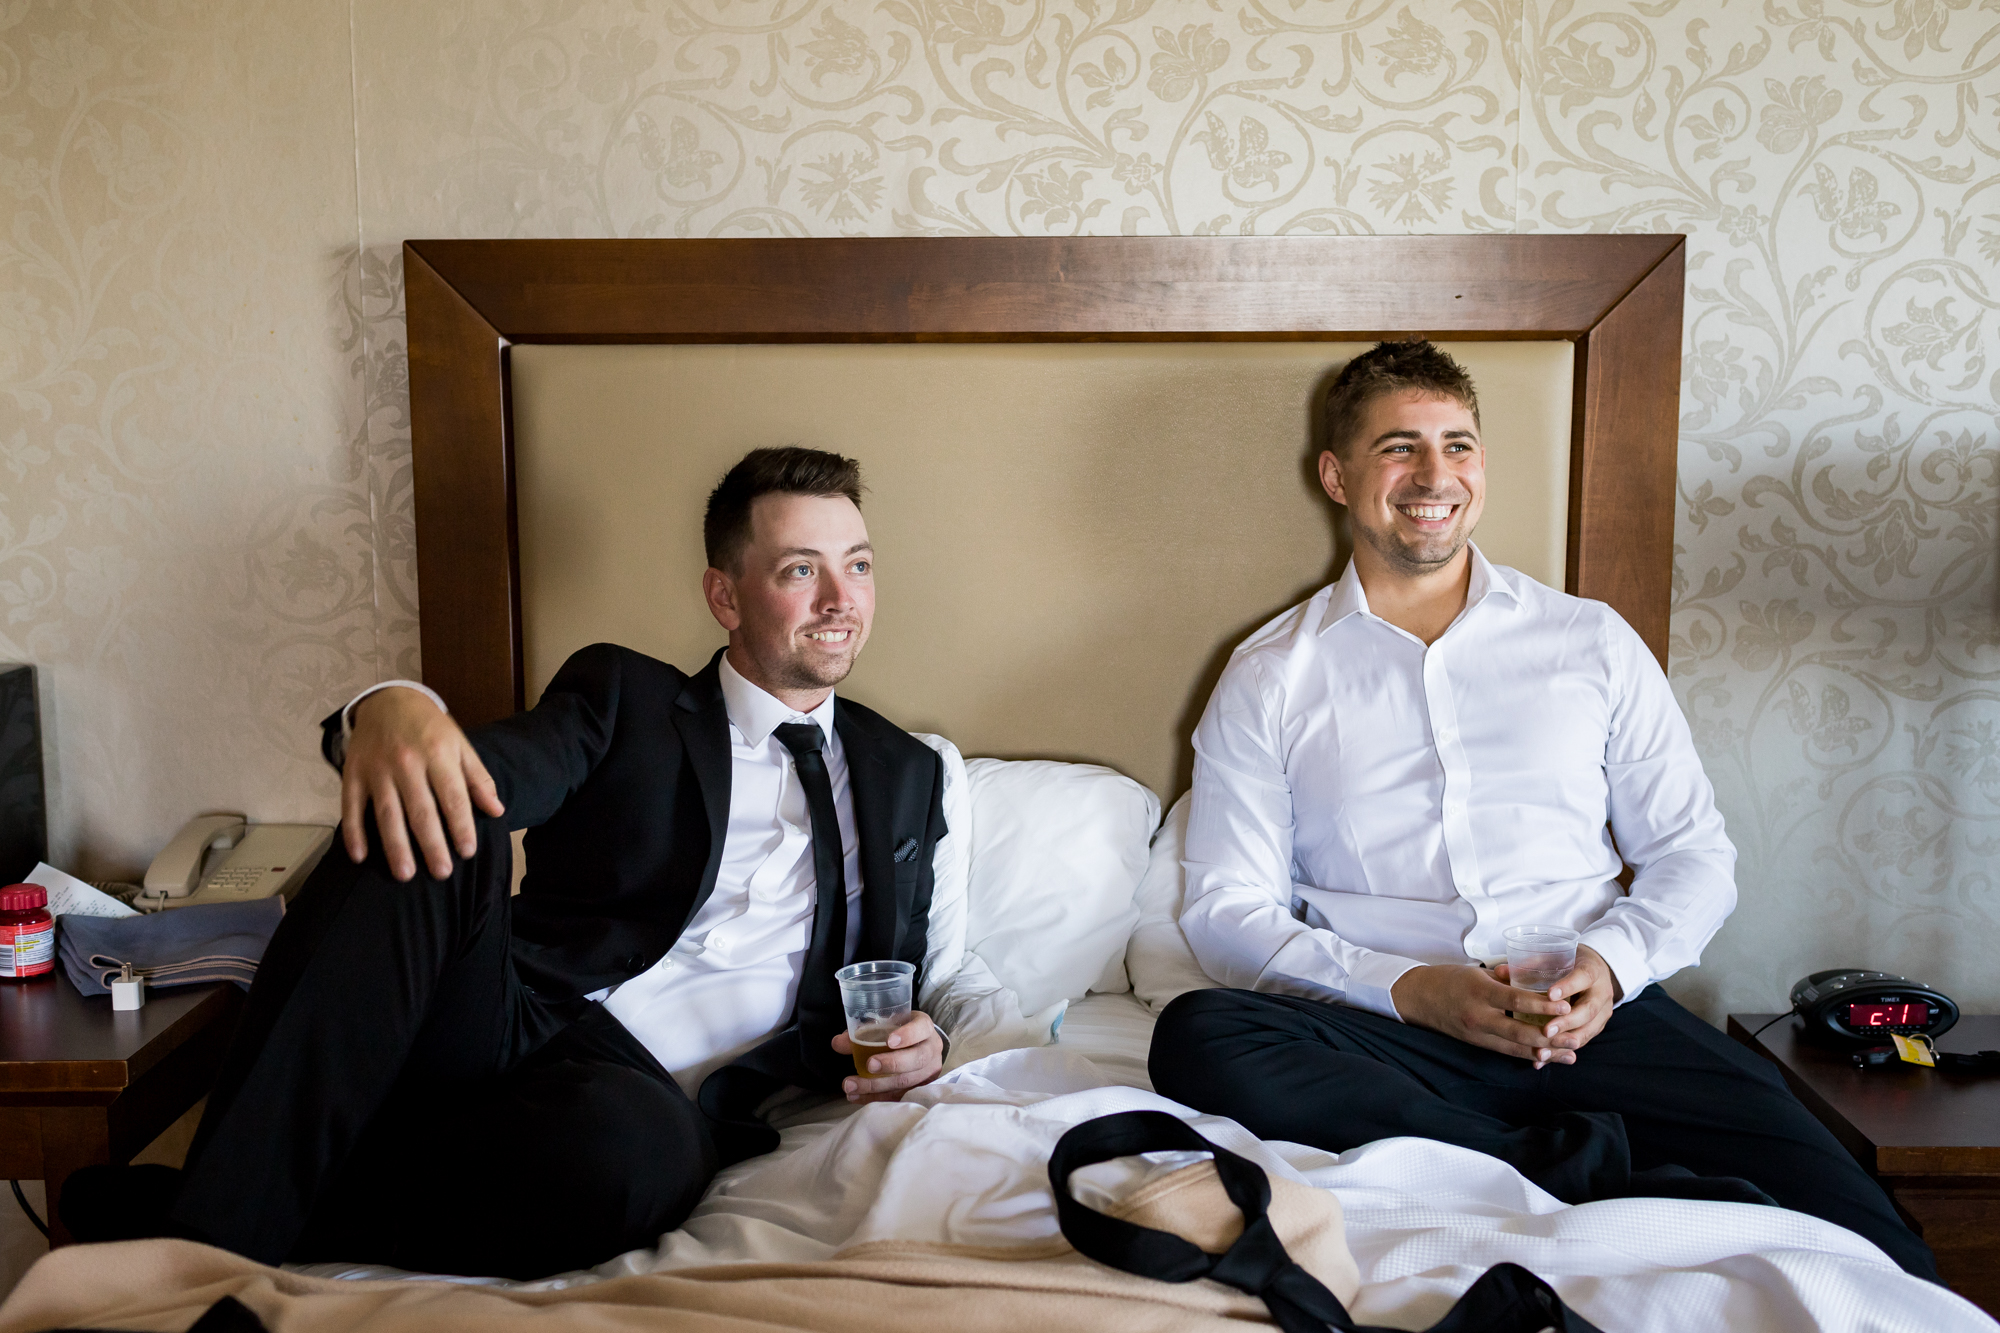 Groomsmen sitting on a hotel bed watching the groom get ready